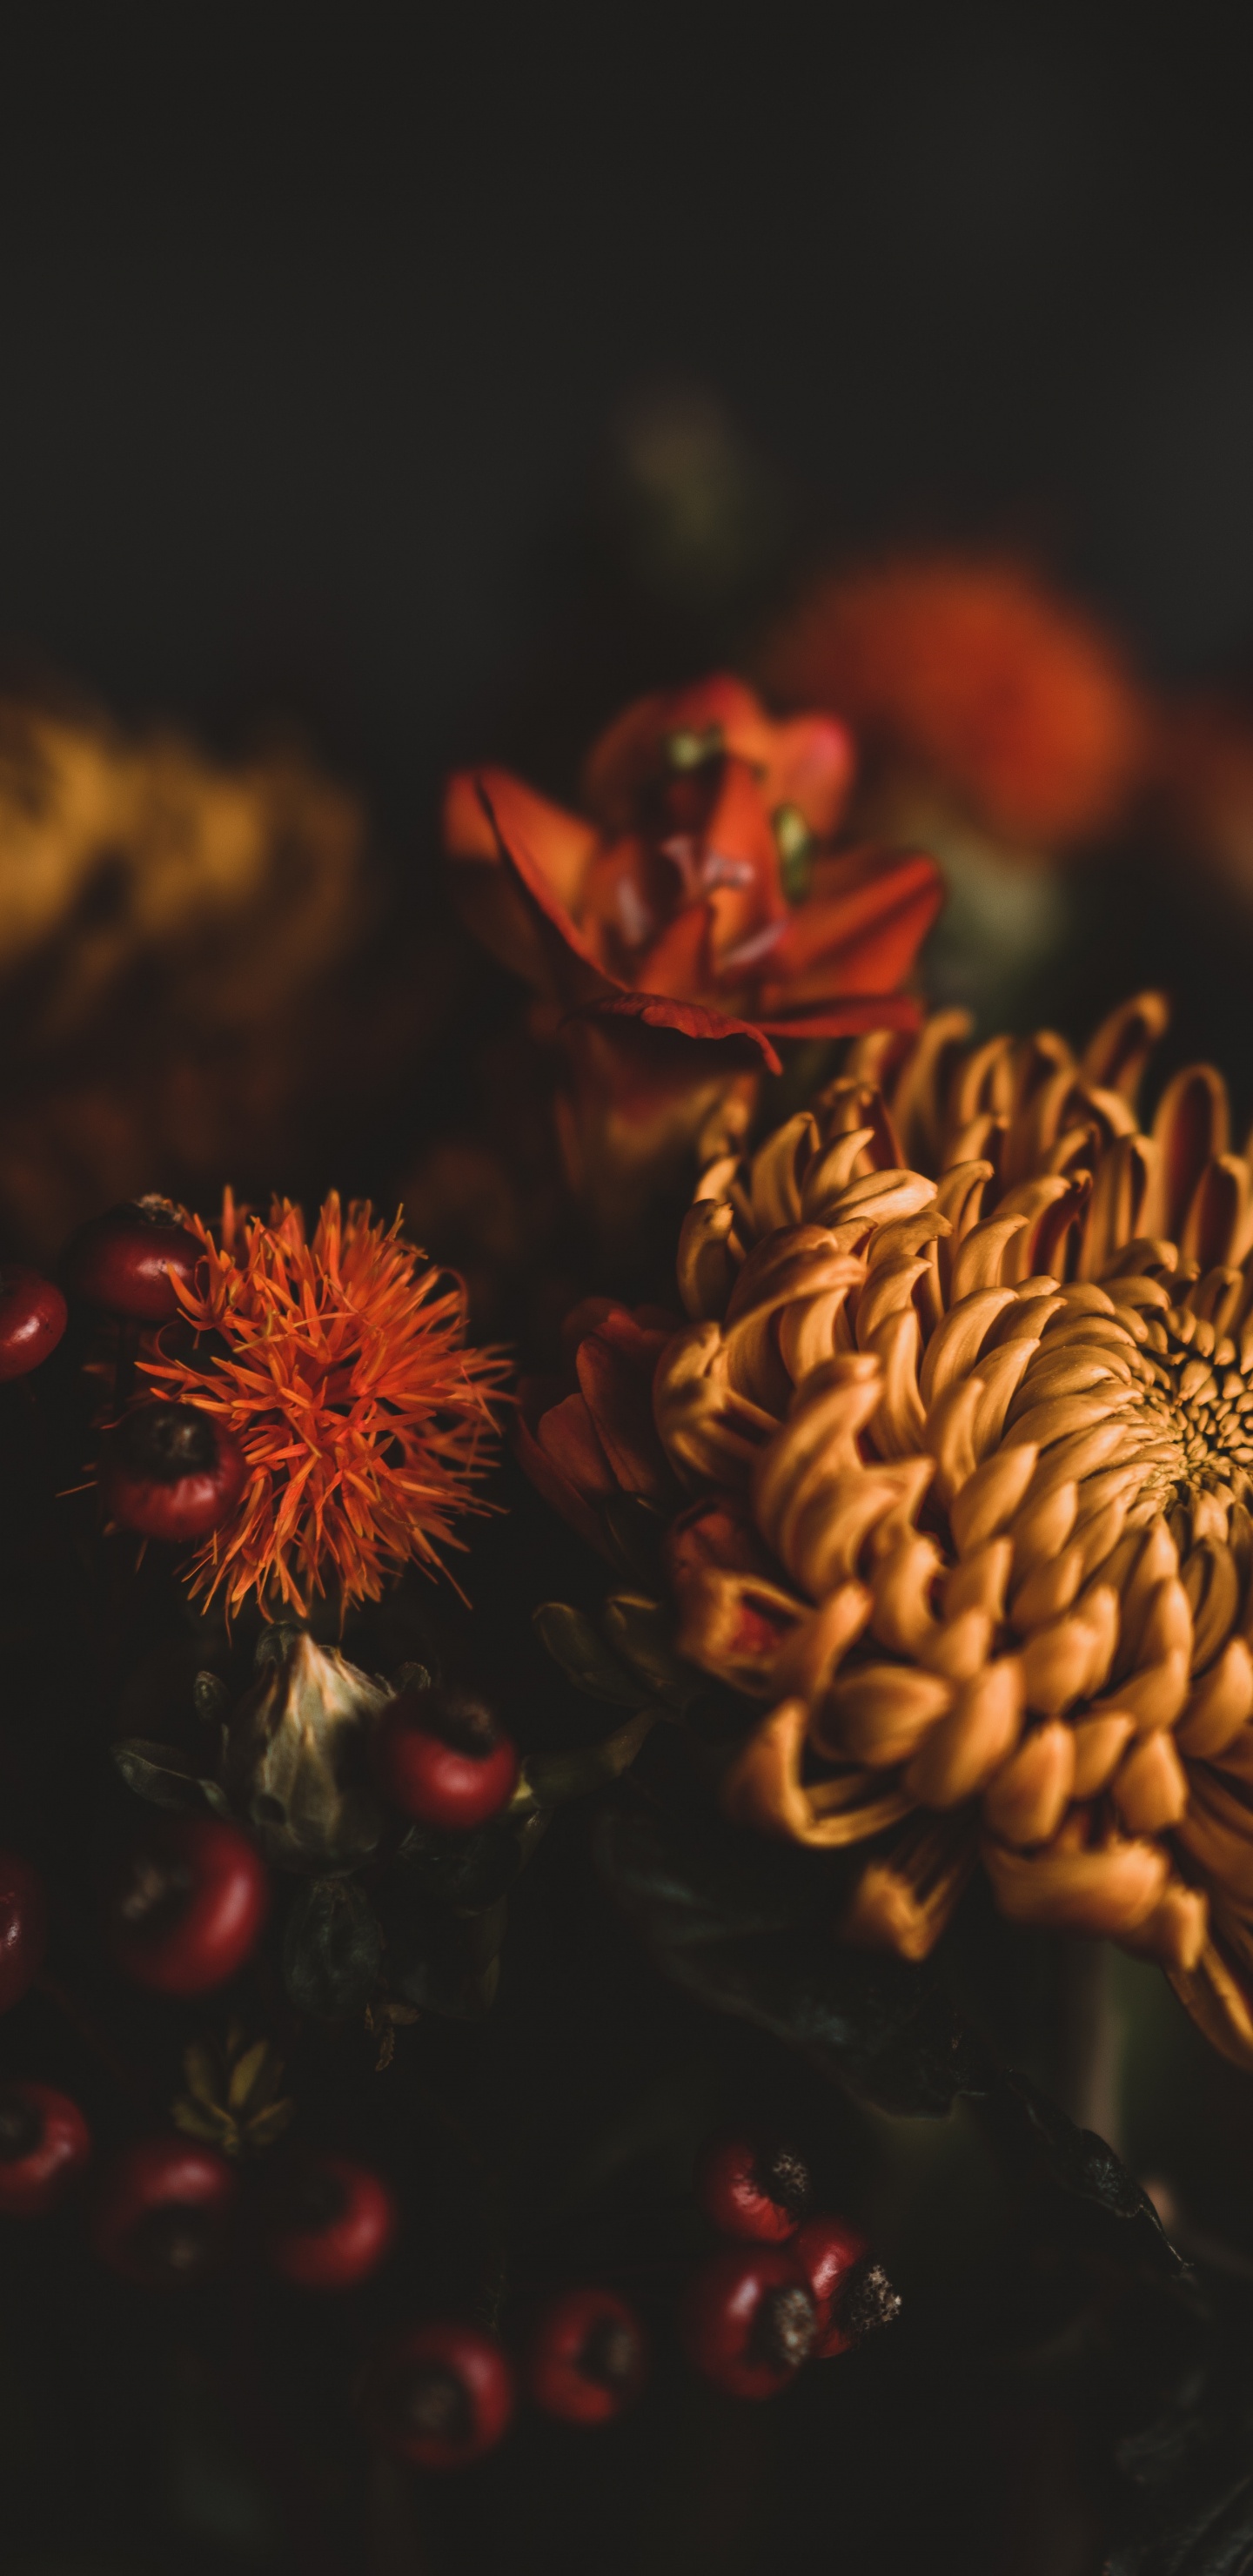 Brown and Red Flower in Close up Photography. Wallpaper in 1440x2960 Resolution